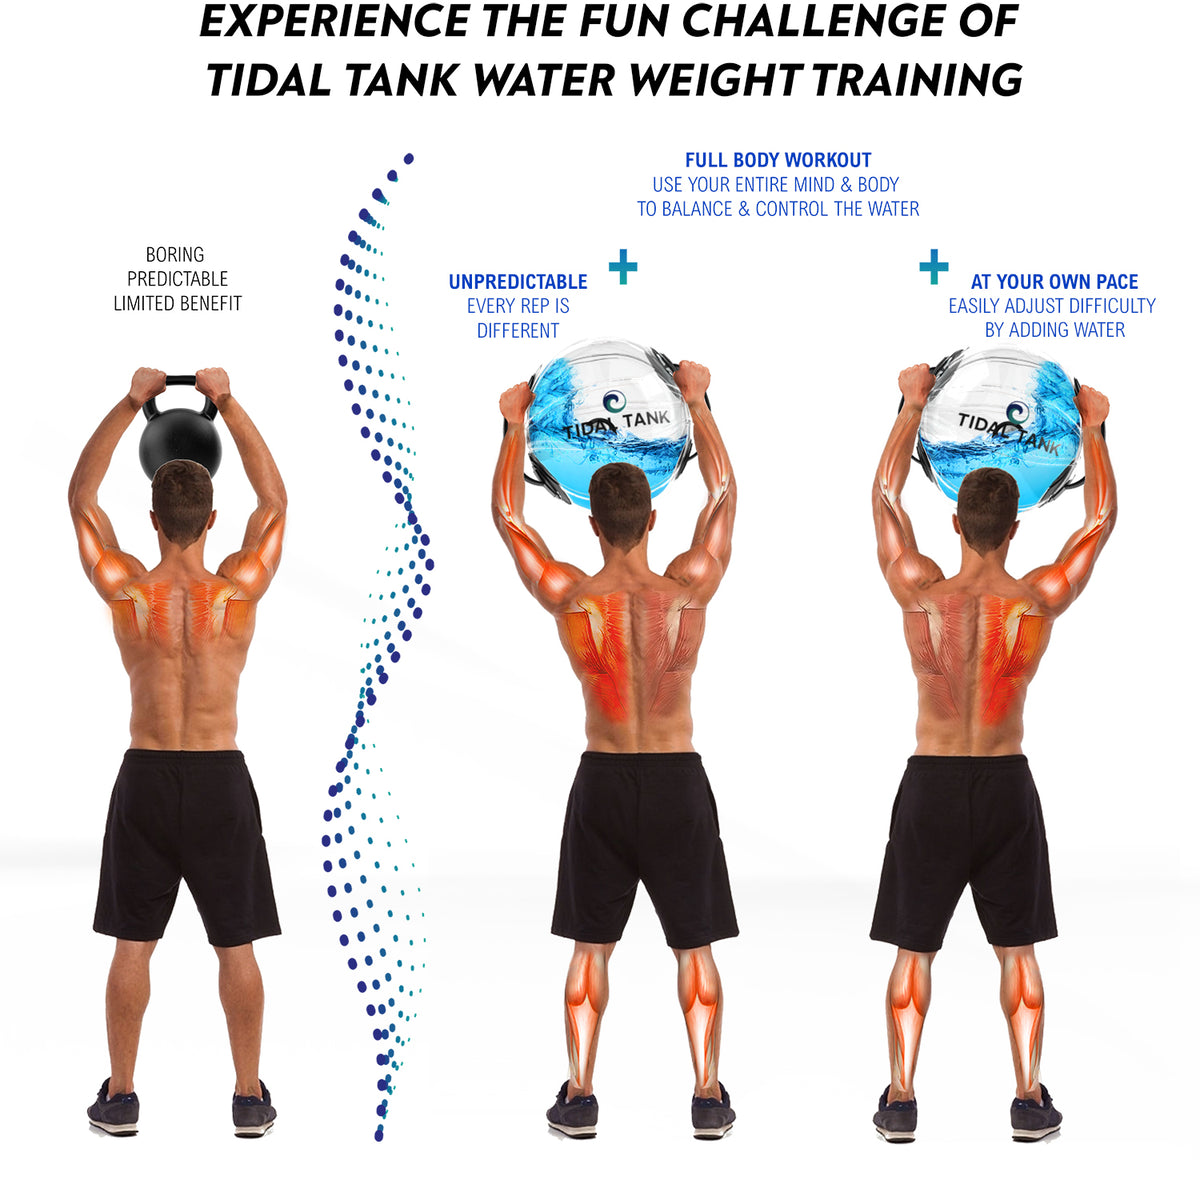 Tidal Tank Baseball Bundle - Move better with the weight that reacts